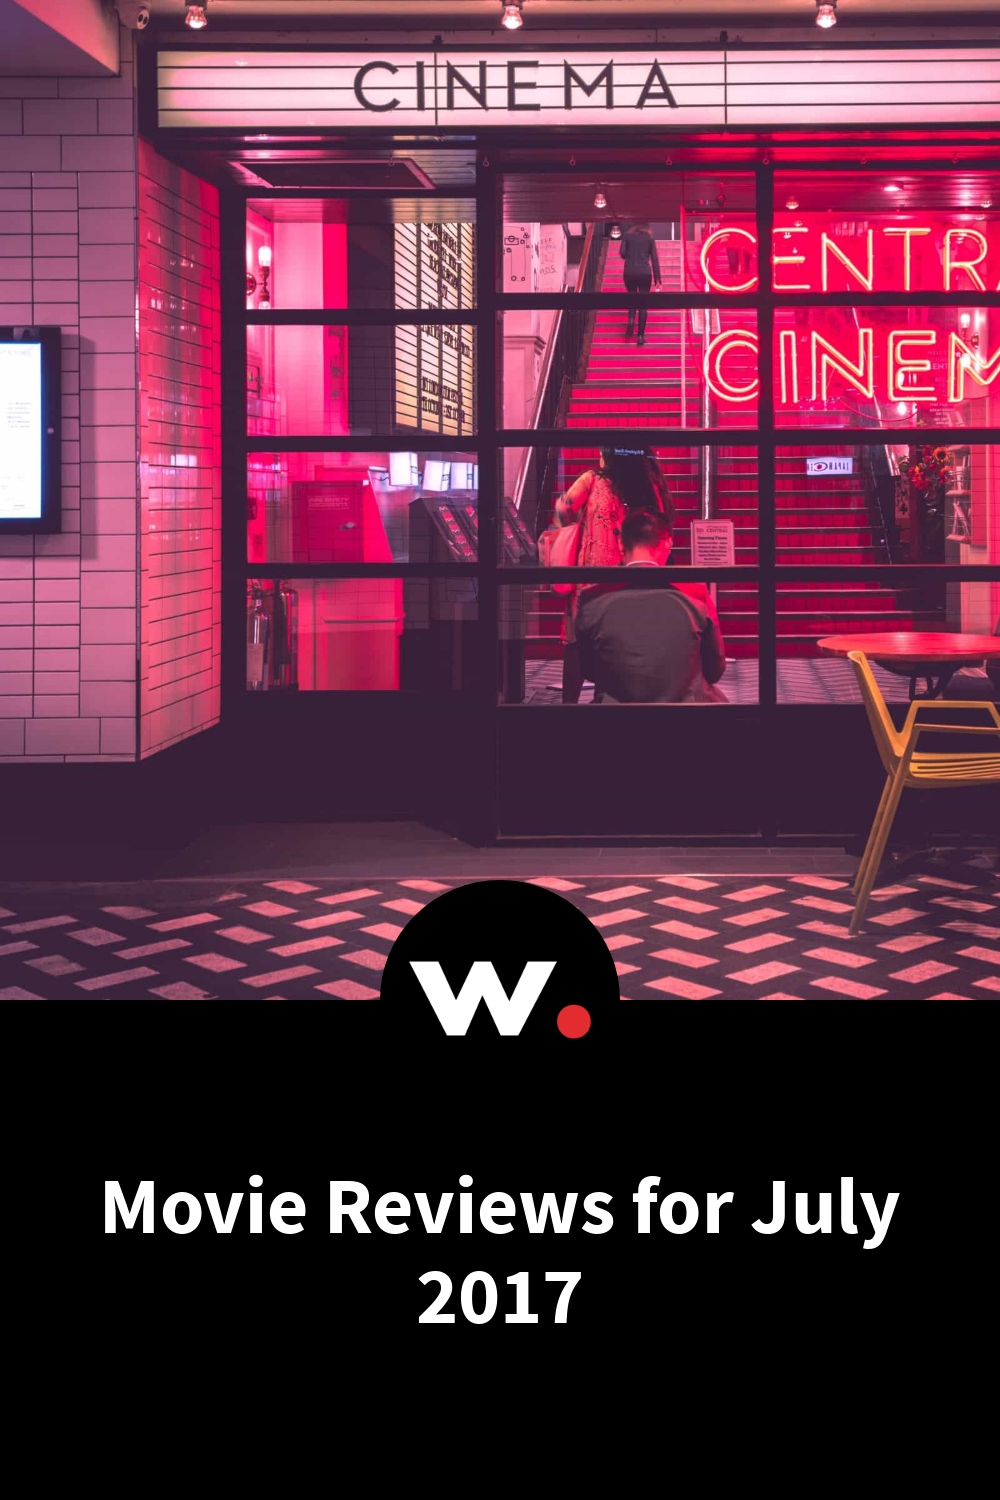 Movie Reviews for July 2017